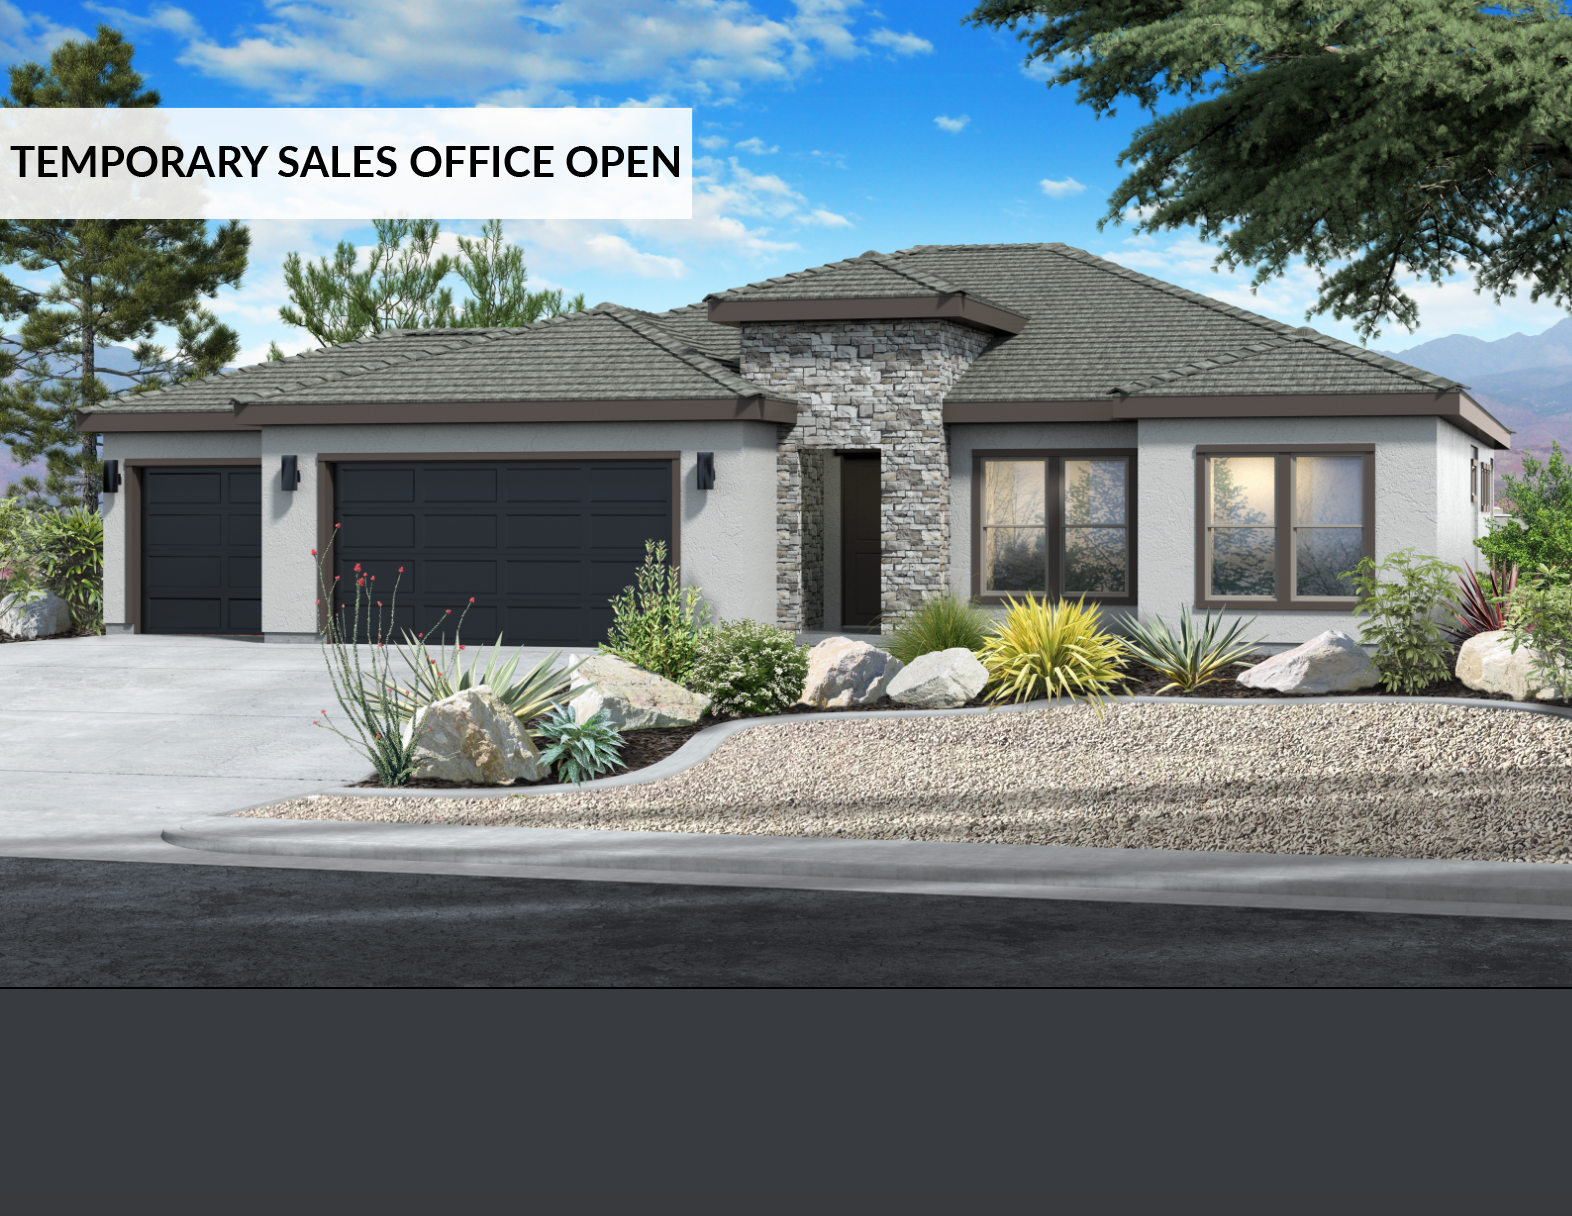 New Home for sale 640 South Molveno Trail, St. George, UT